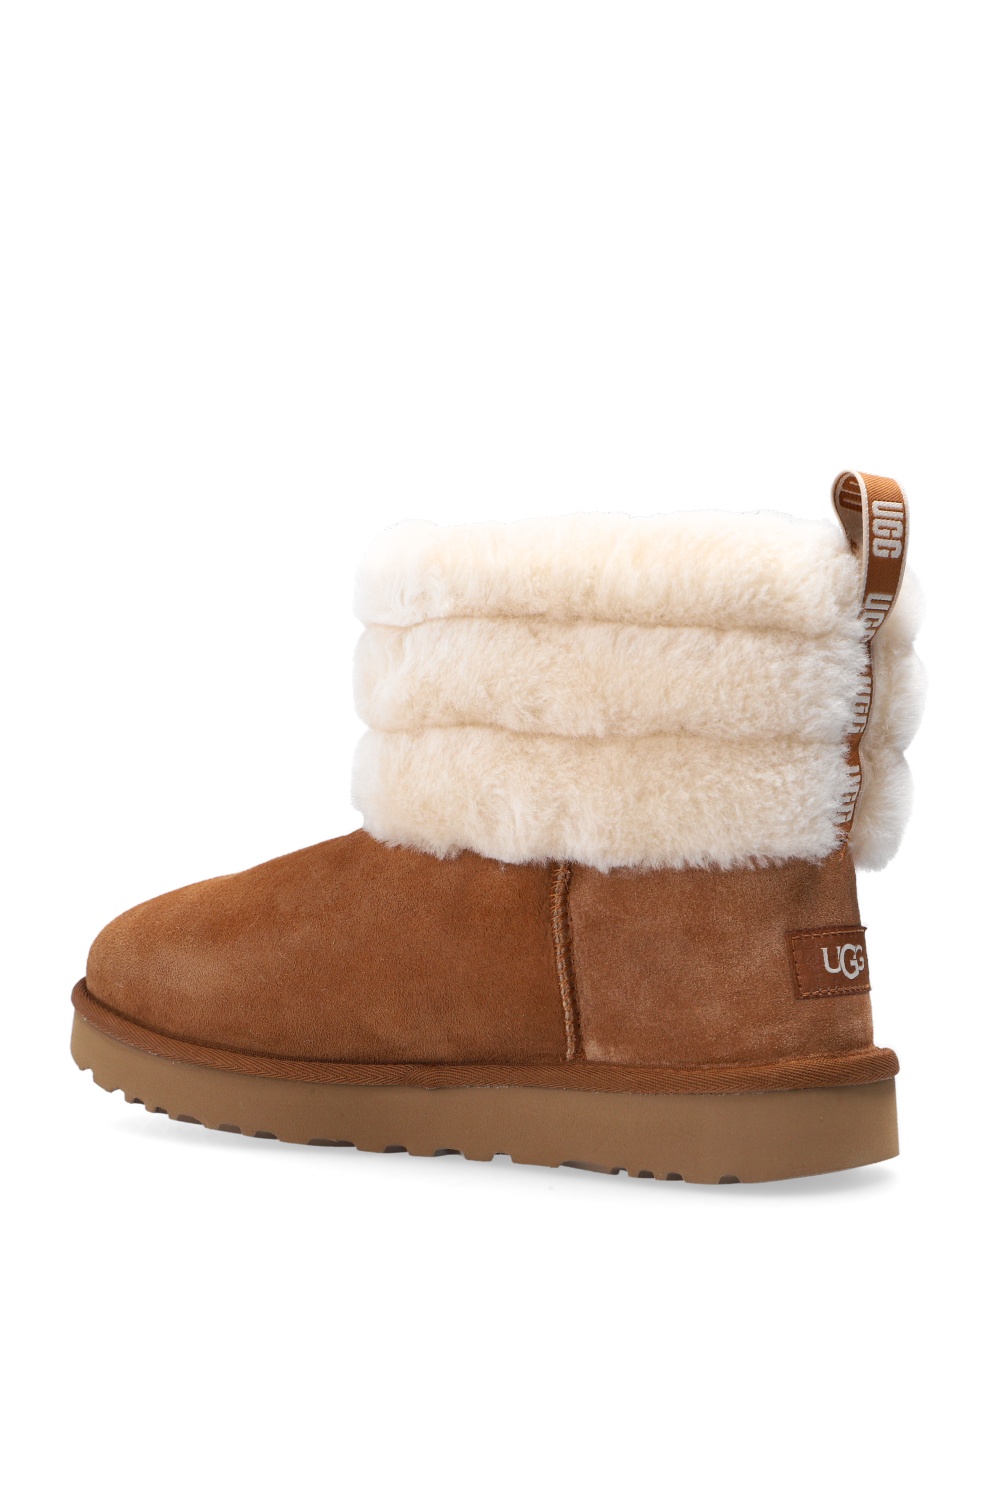 uggs fluff mini quilted